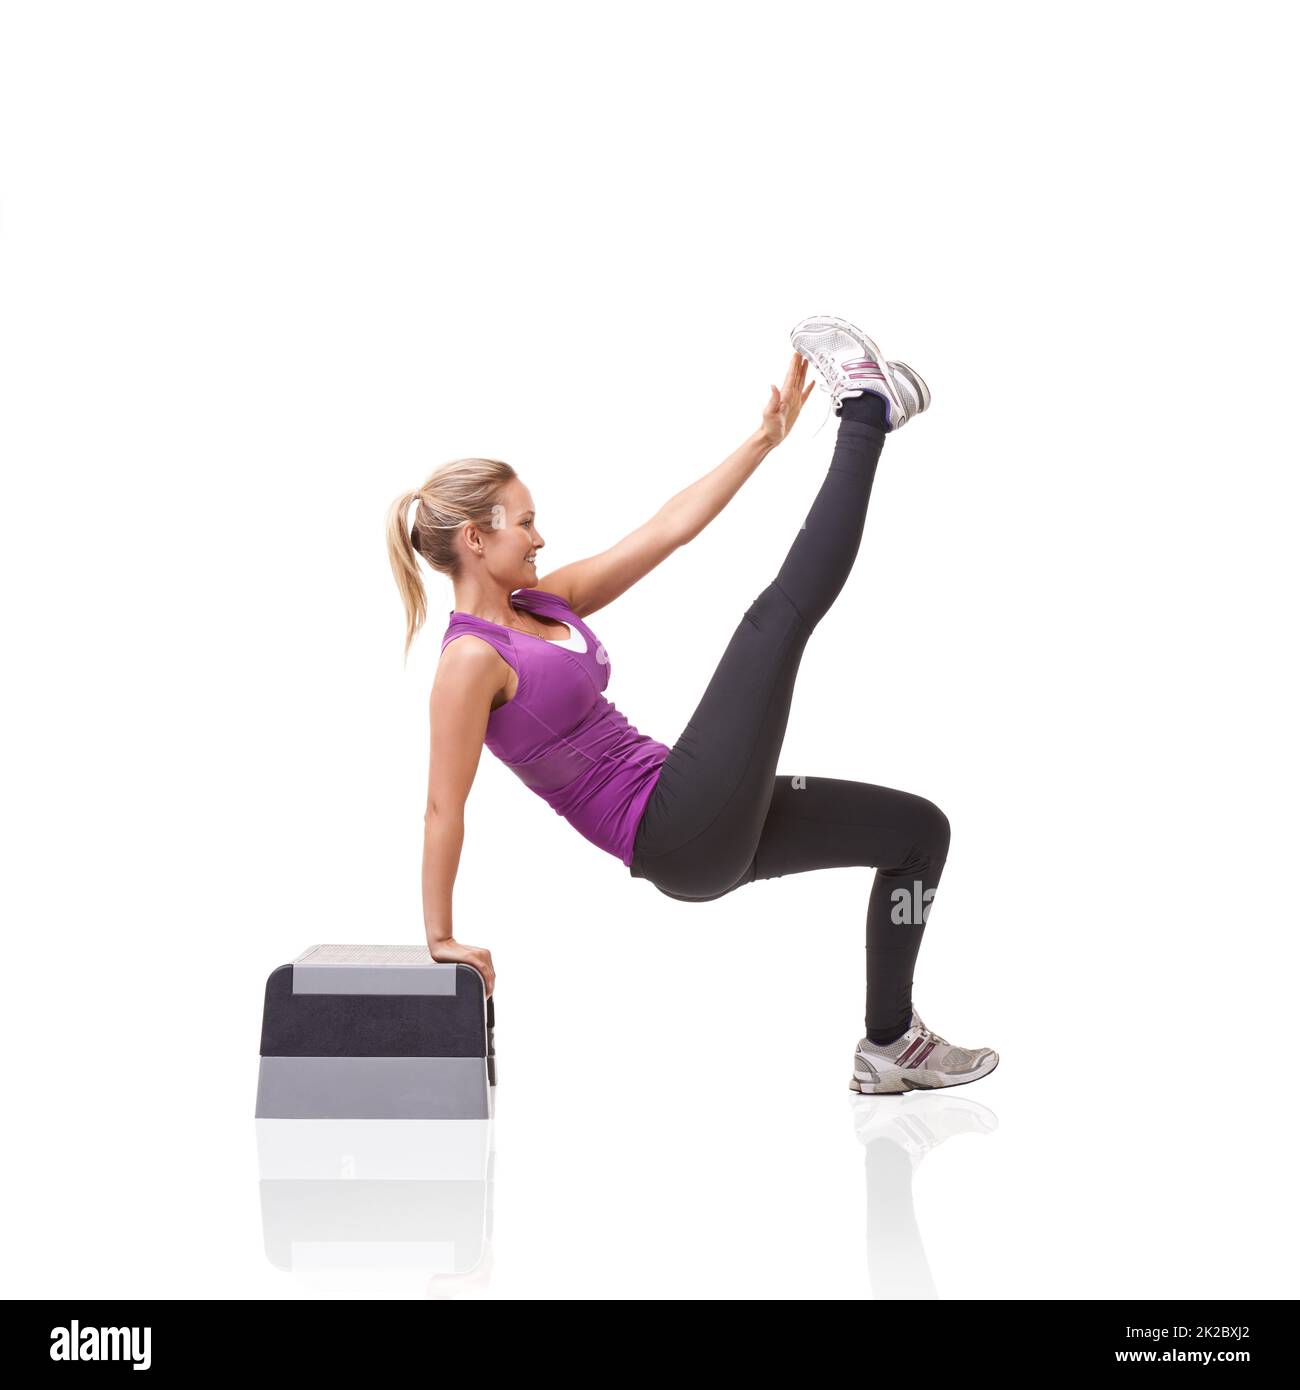 Balance and tone. A smiling young woman doing aerobics on an aerobic step isolated against a white background. Stock Photo